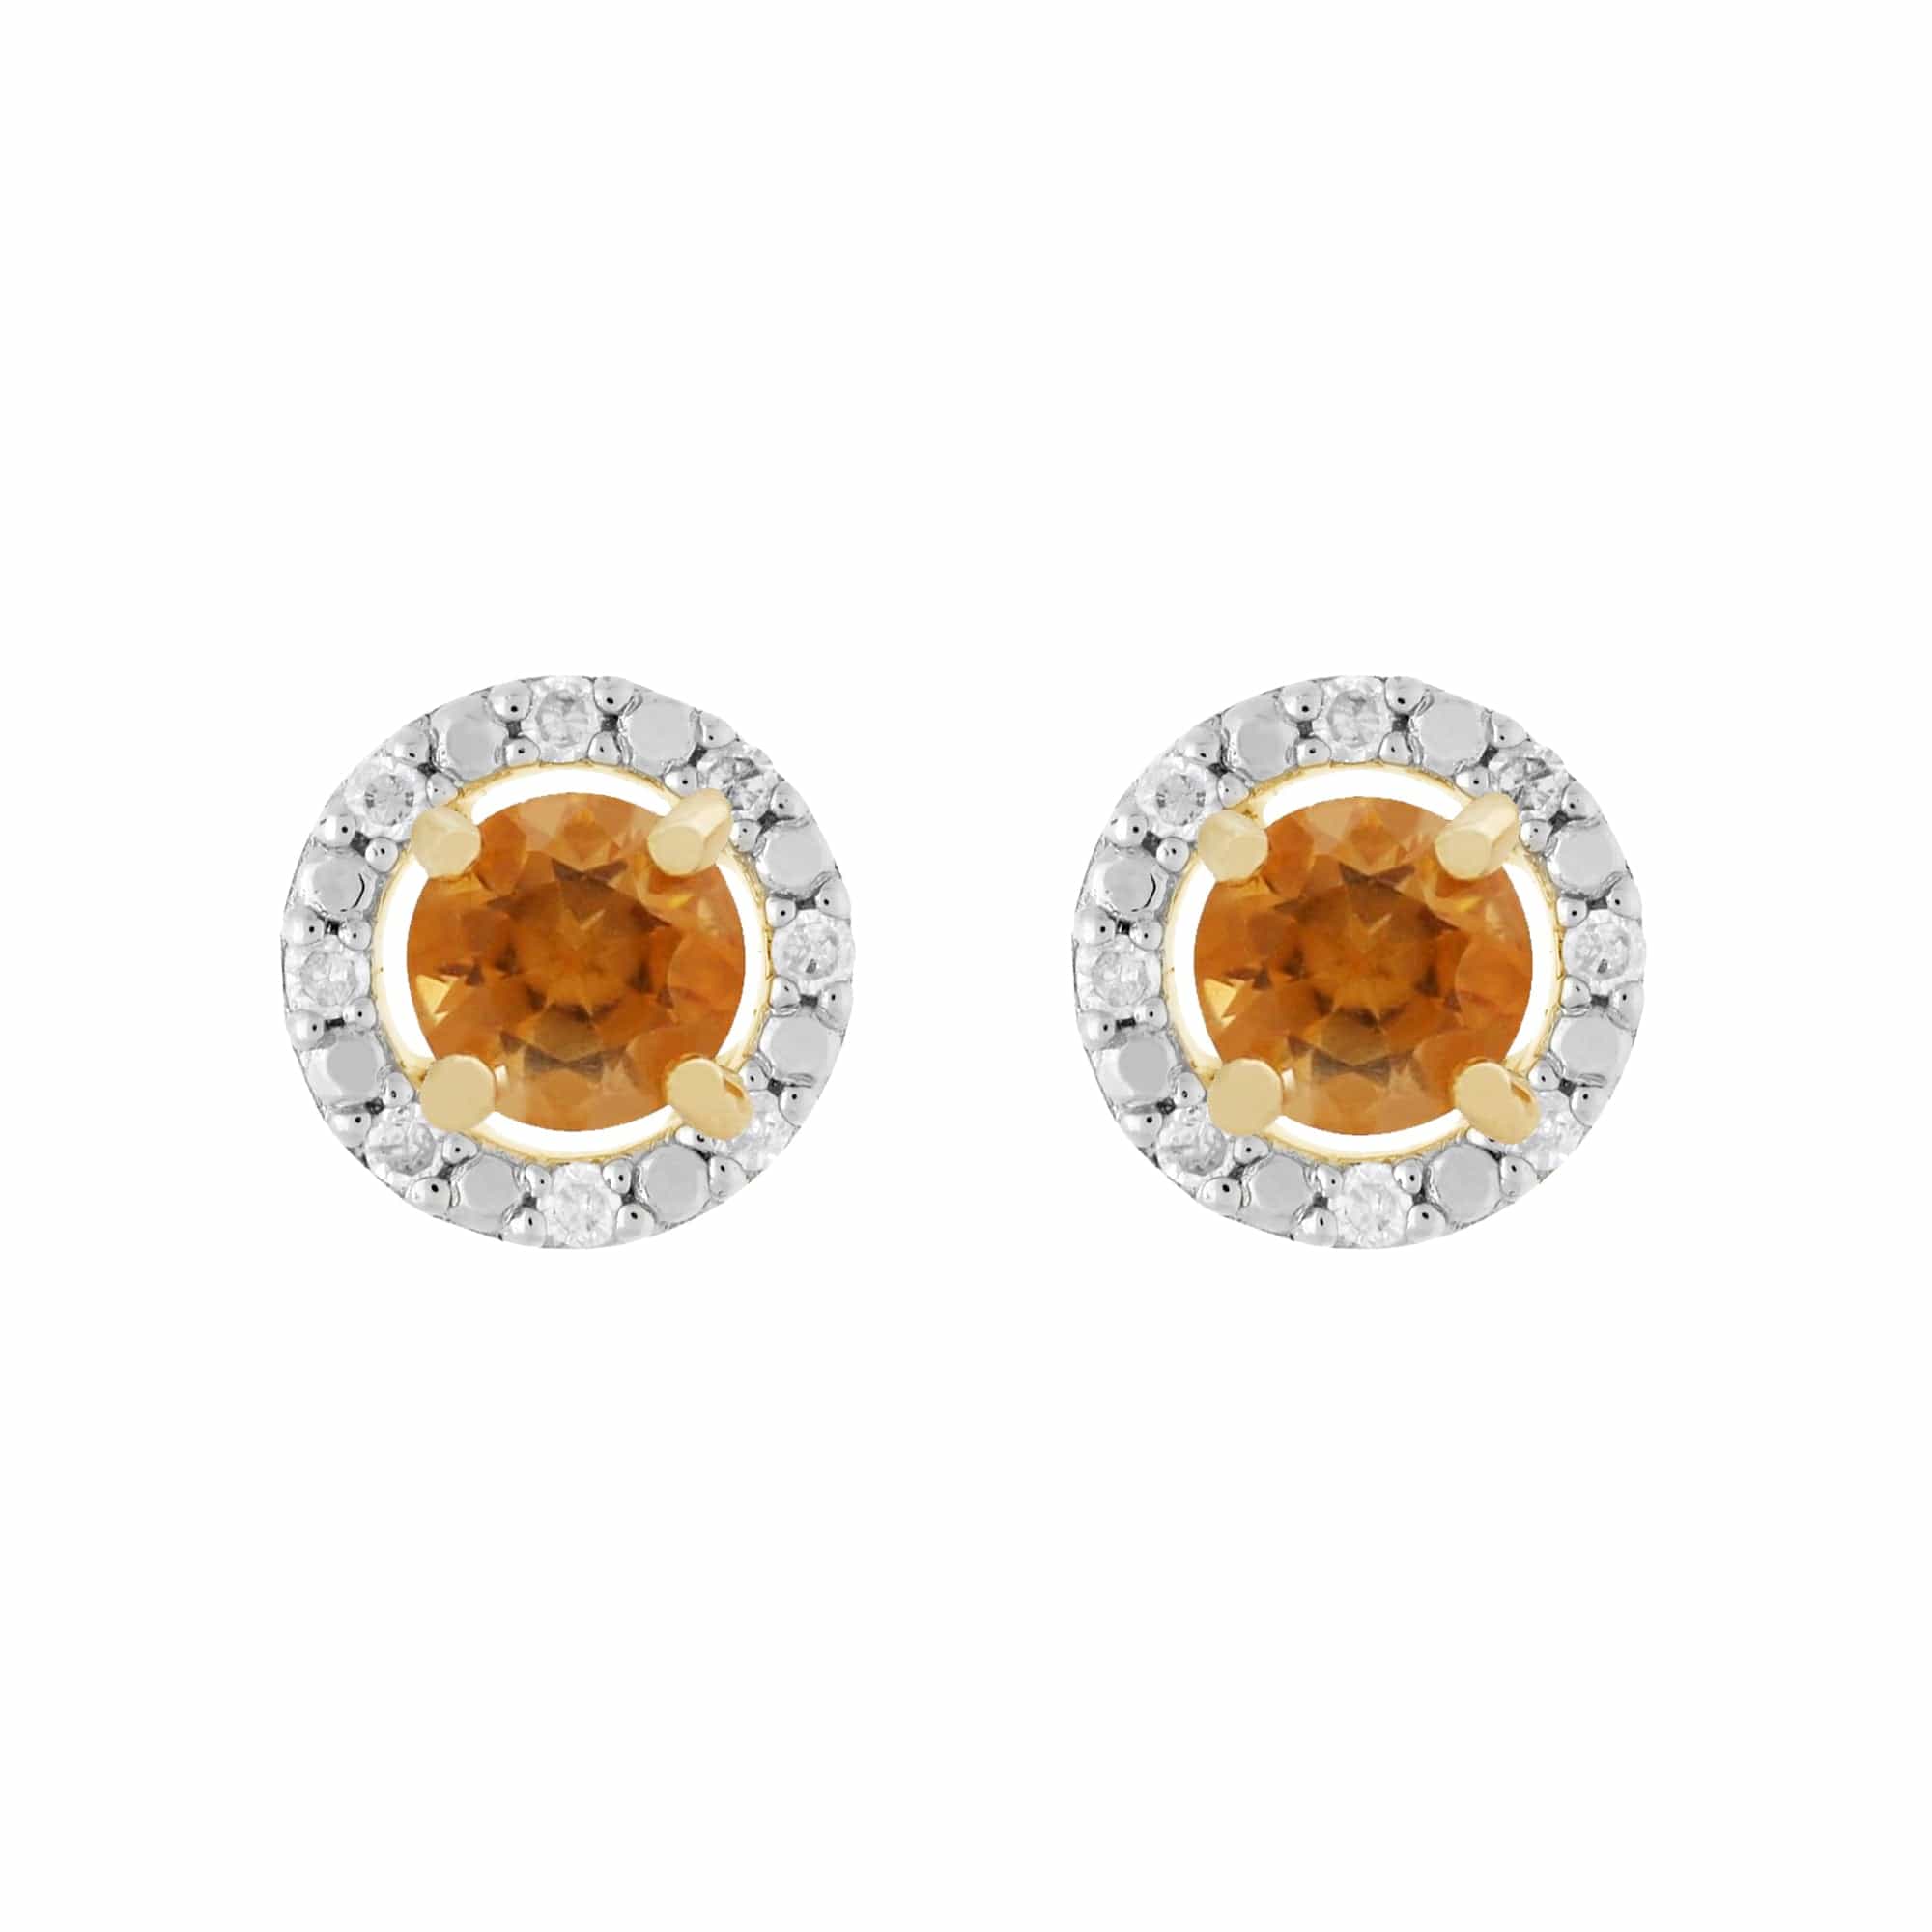 183E0083139-191E0376019 Classic Round Citrine Stud Earrings with Detachable Diamond Round Earrings Jacket Set in 9ct Yellow Gold 1